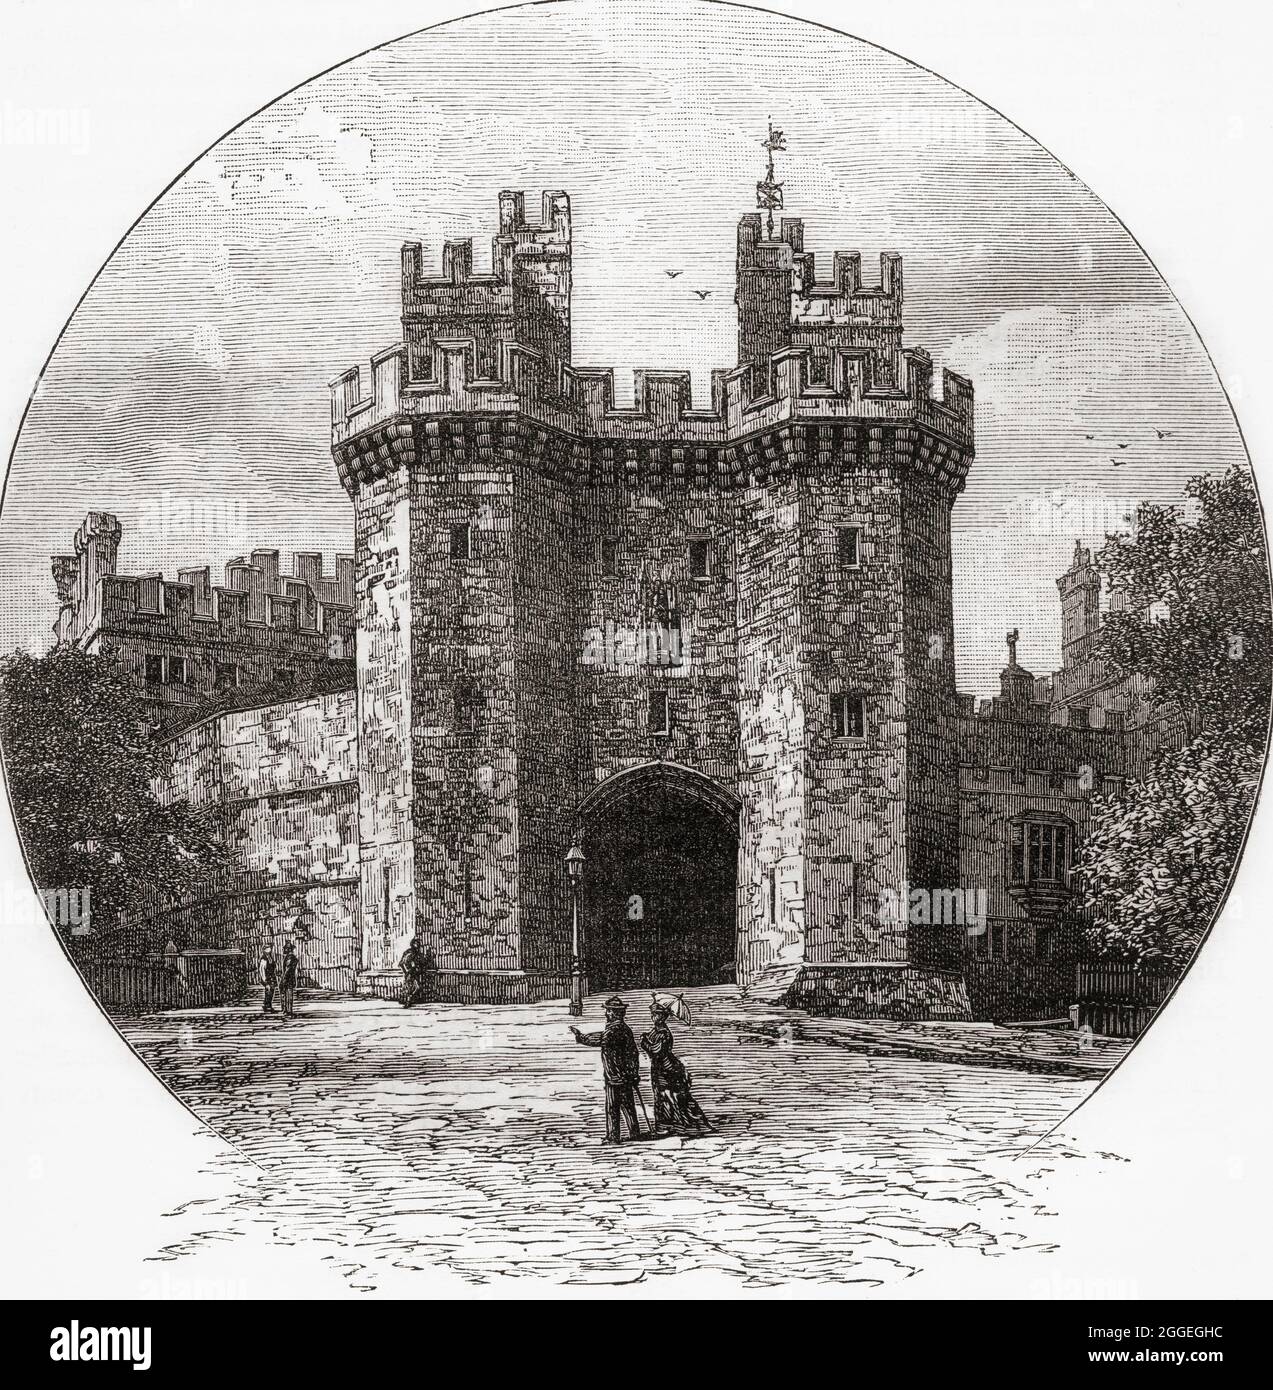 Gateway to Lancaster Castle, Lancaster, Lancashire, England, seen here in the 19th century.  From Picturesque England its Landmarks and Historic Haunts, published, 1891 Stock Photo